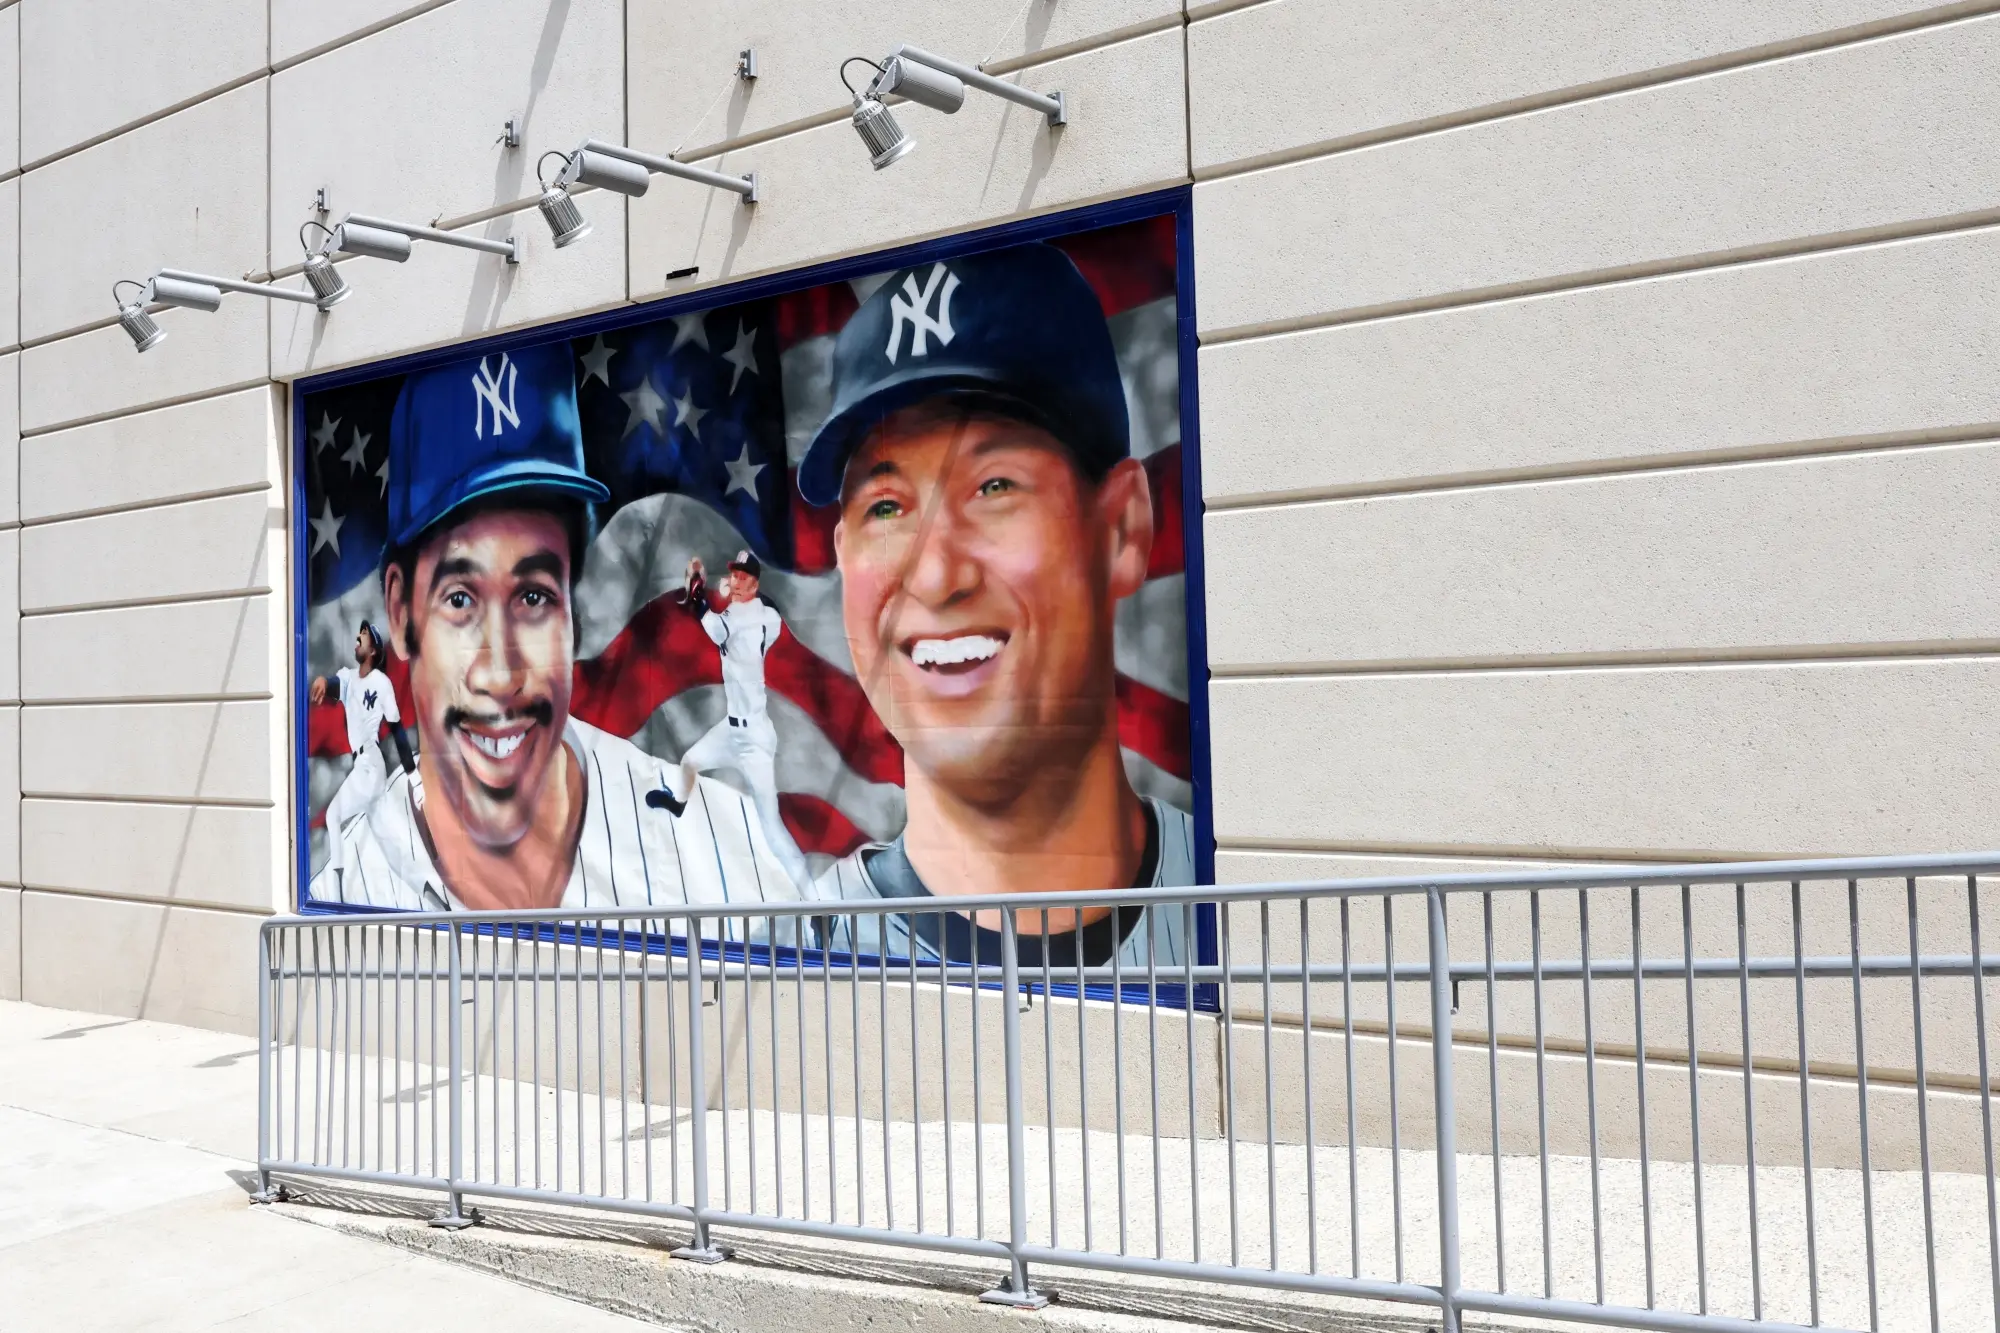 NEW YORK YANKEES HONOR BLACK LEGENDS WITH MURALS. PART 2 OF 3